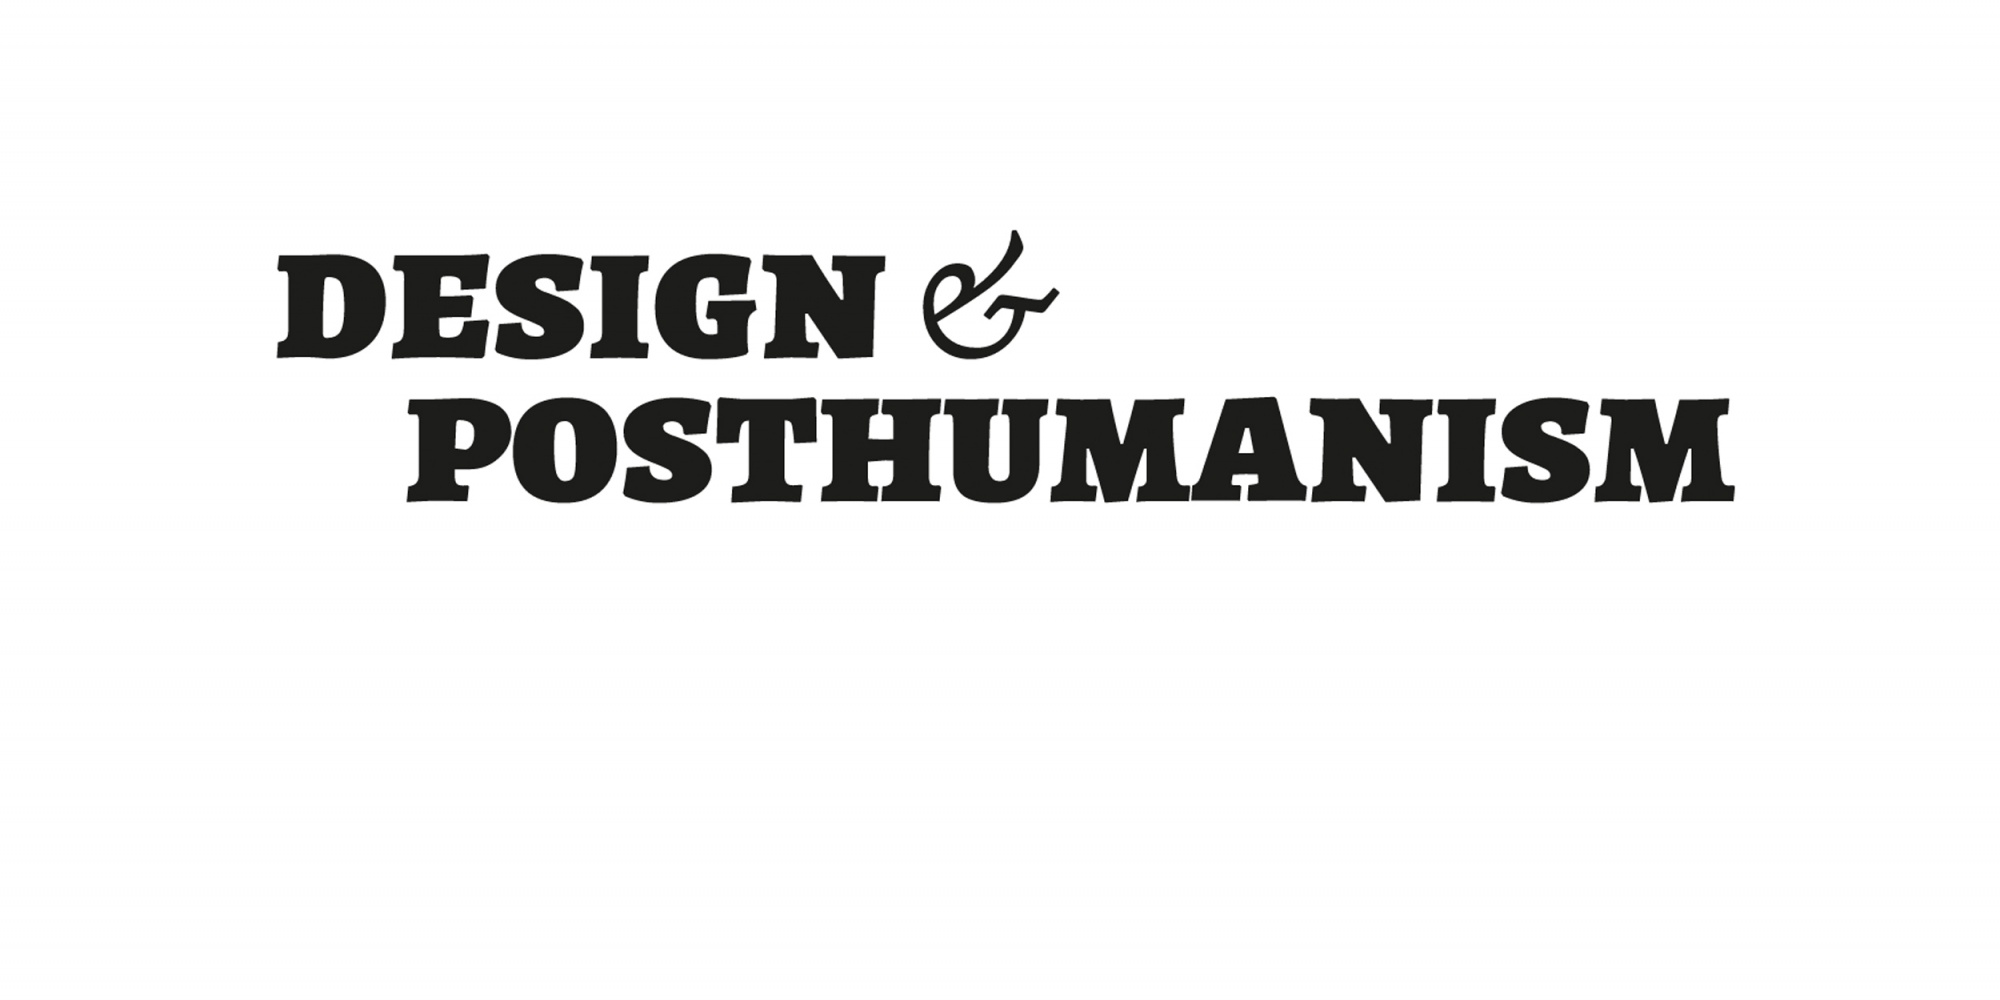 Design and Posthumanism Network